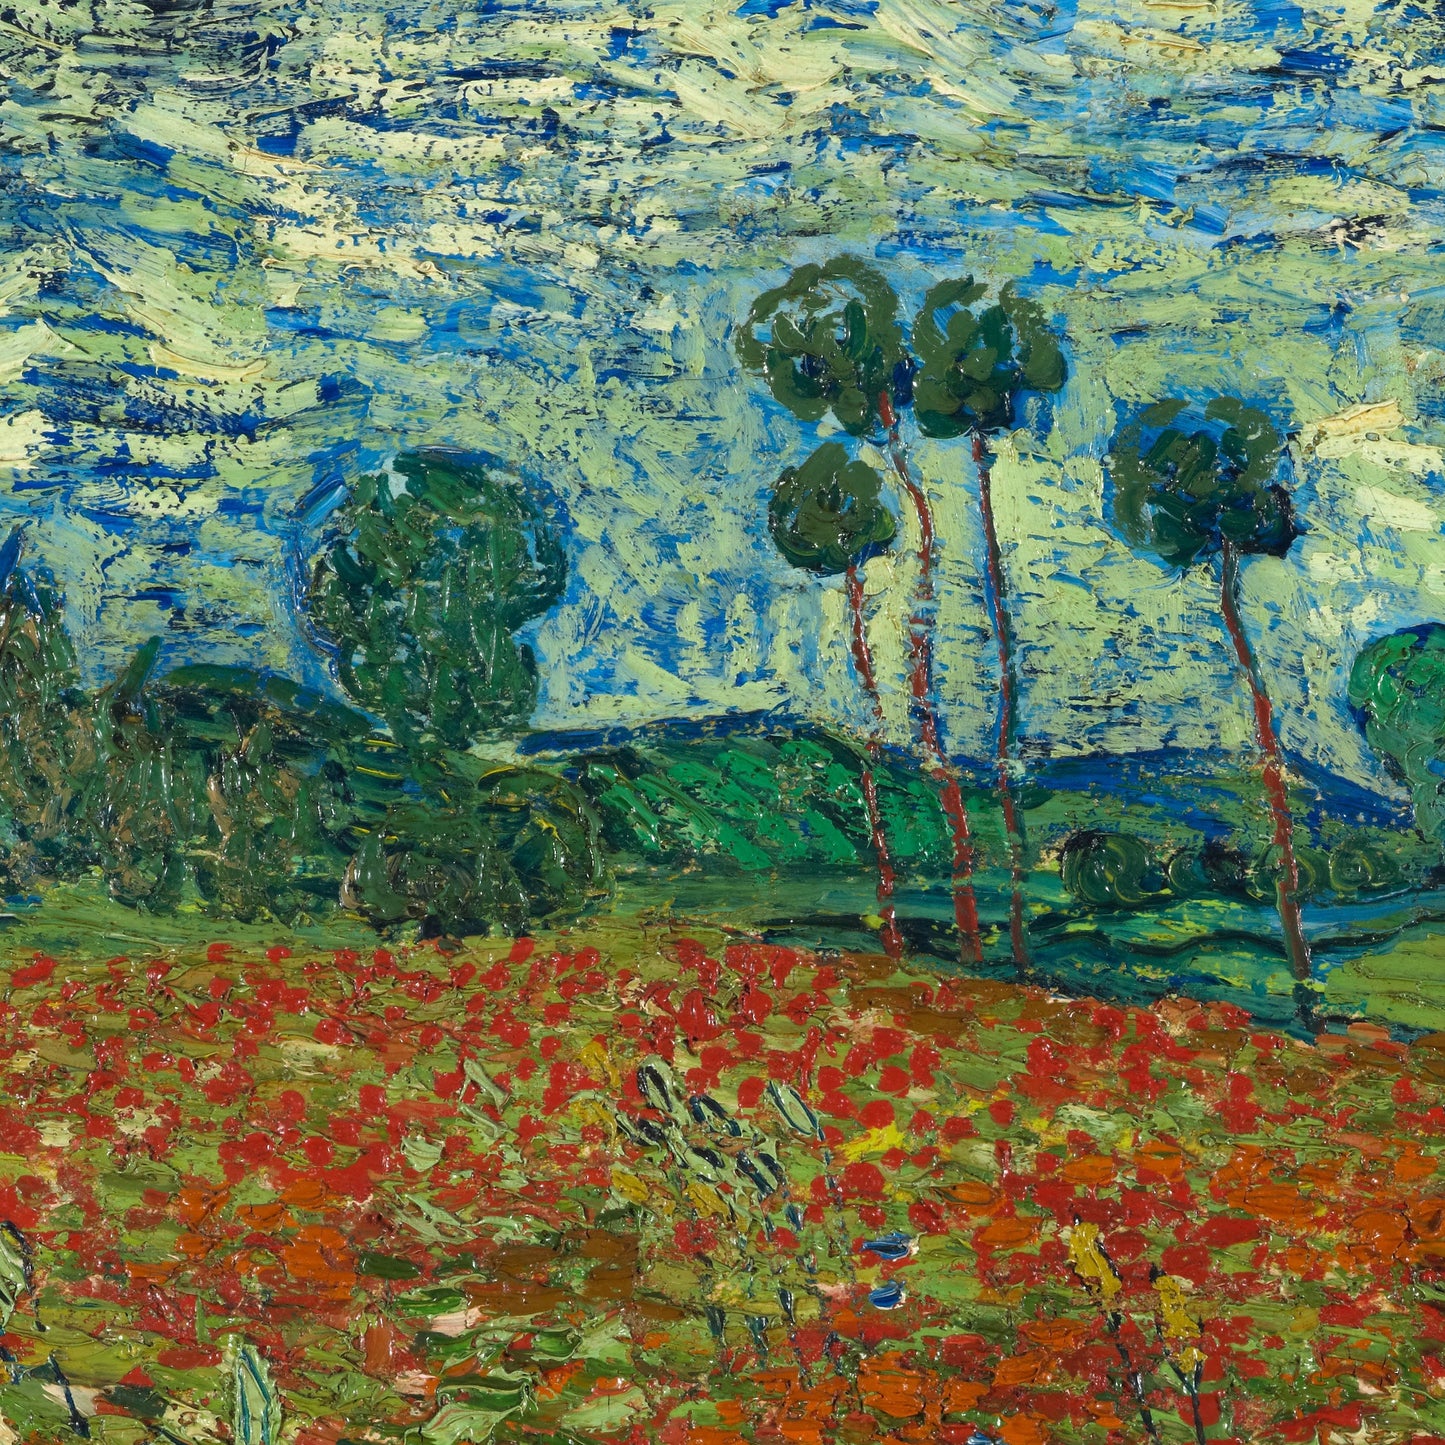 Poppy Field by Vincent Van Gogh, 3d Printed with texture and brush strokes looks like original oil-painting, code:222